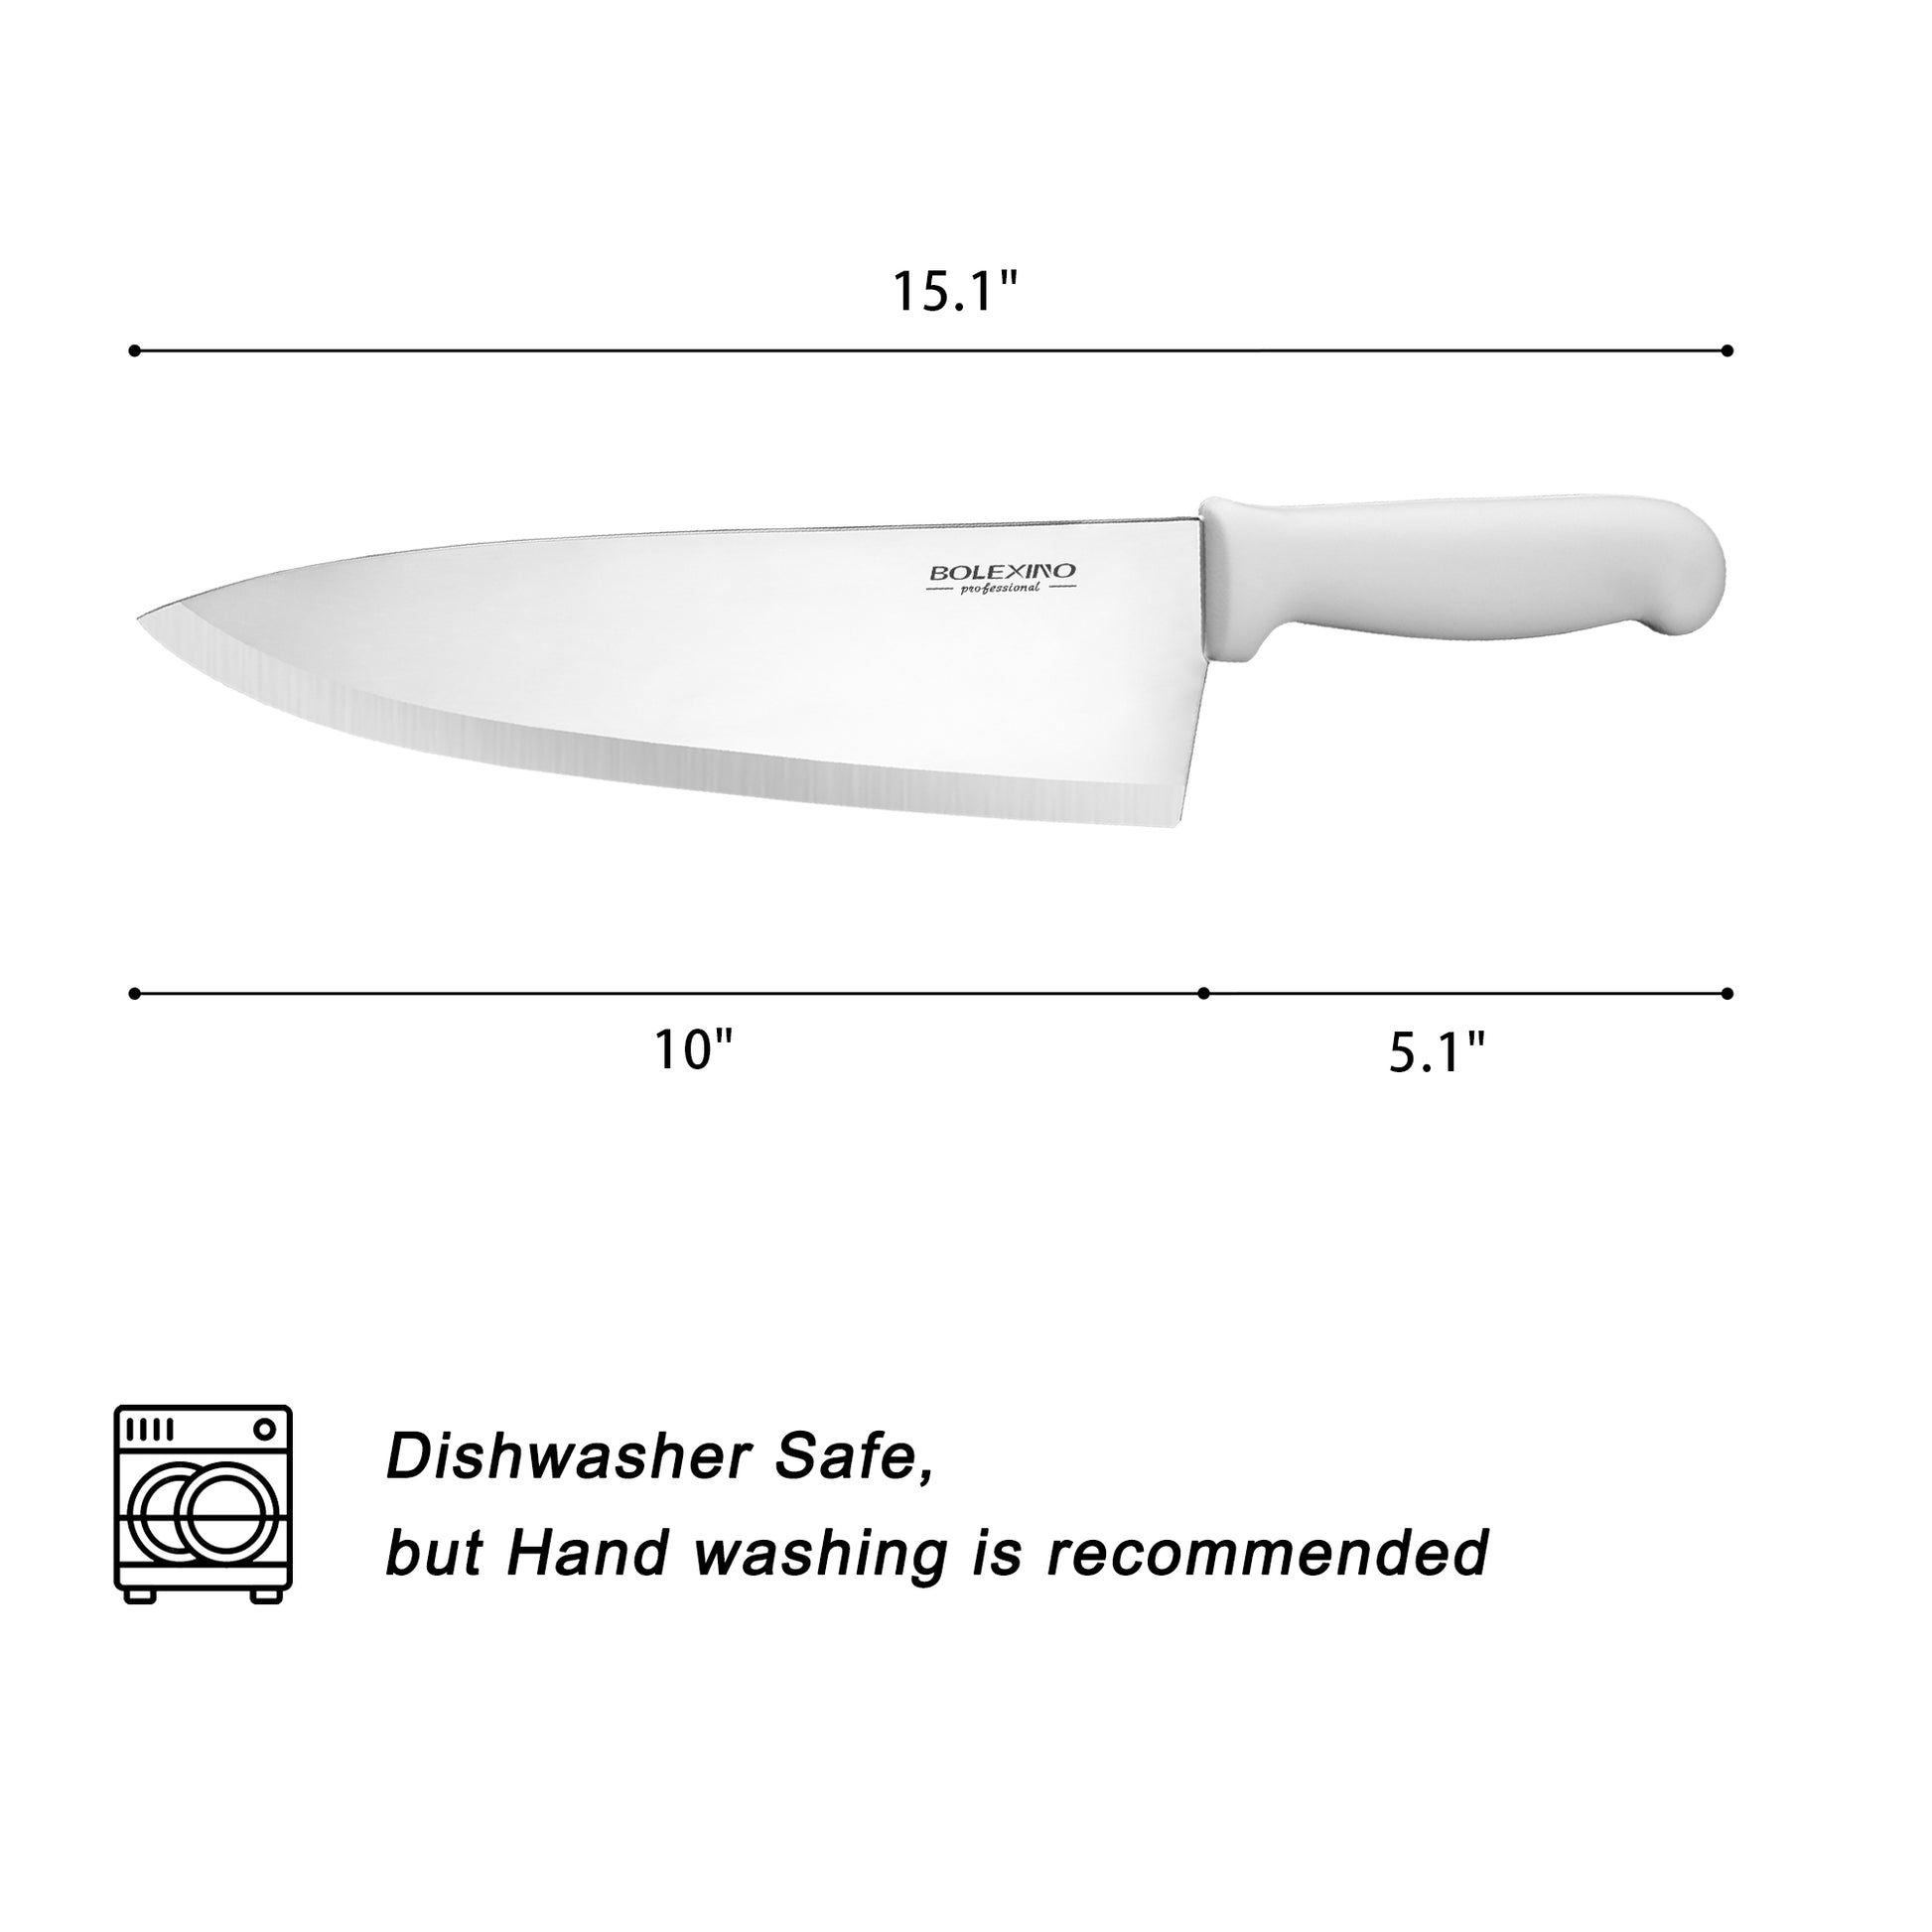 DELFINA Chef Knife, 8 Inch Kitchen Knife with Sheath, Professional High  Carbon Stainless Steel Ultra Sharp Cooking Knife with Ergonomic Handle,Well